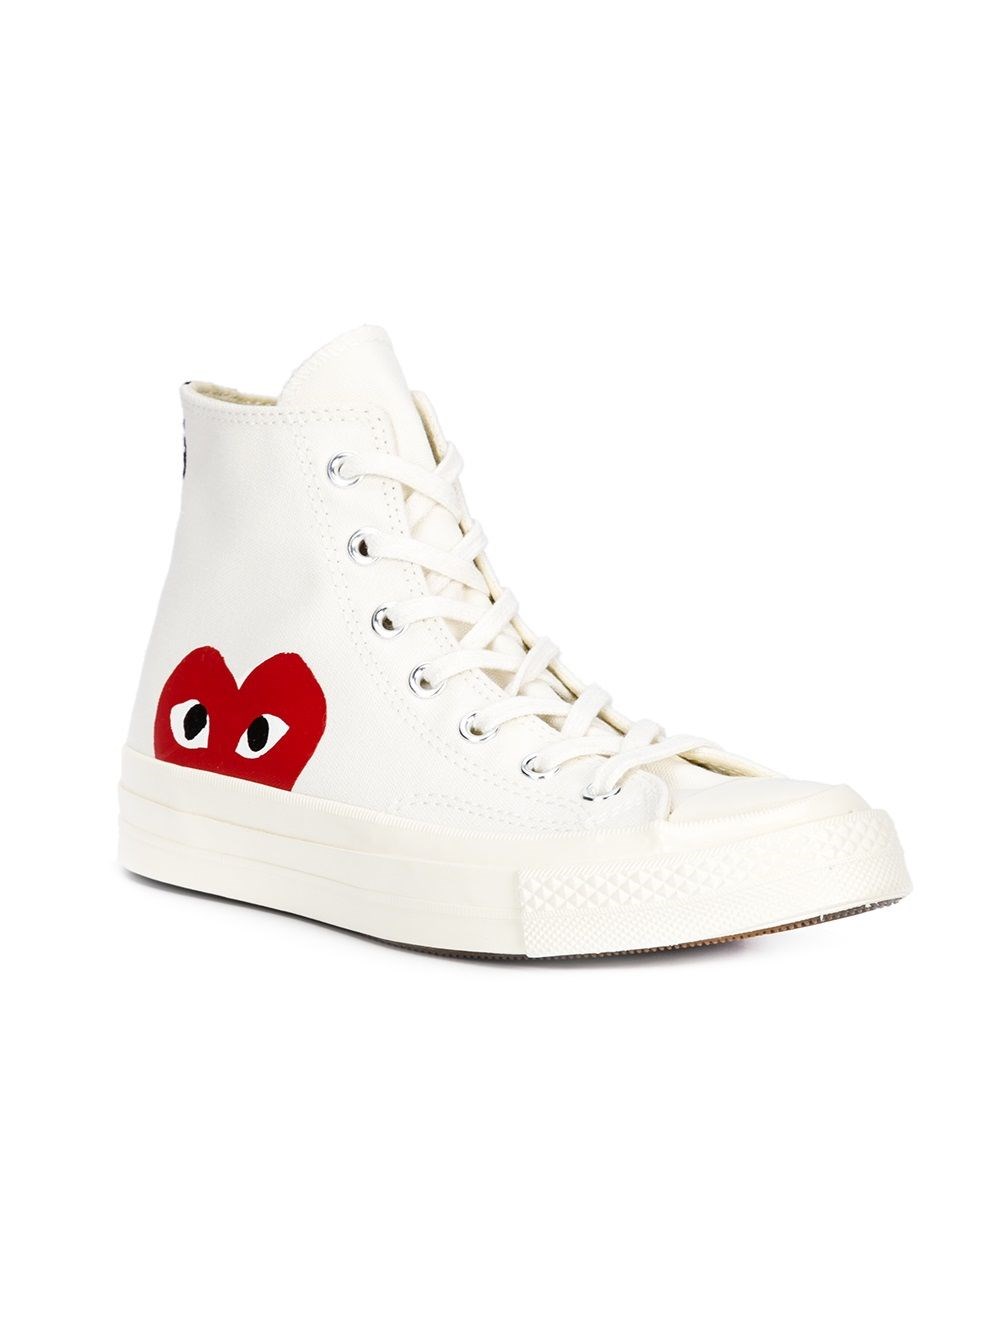 converse with the heart on it